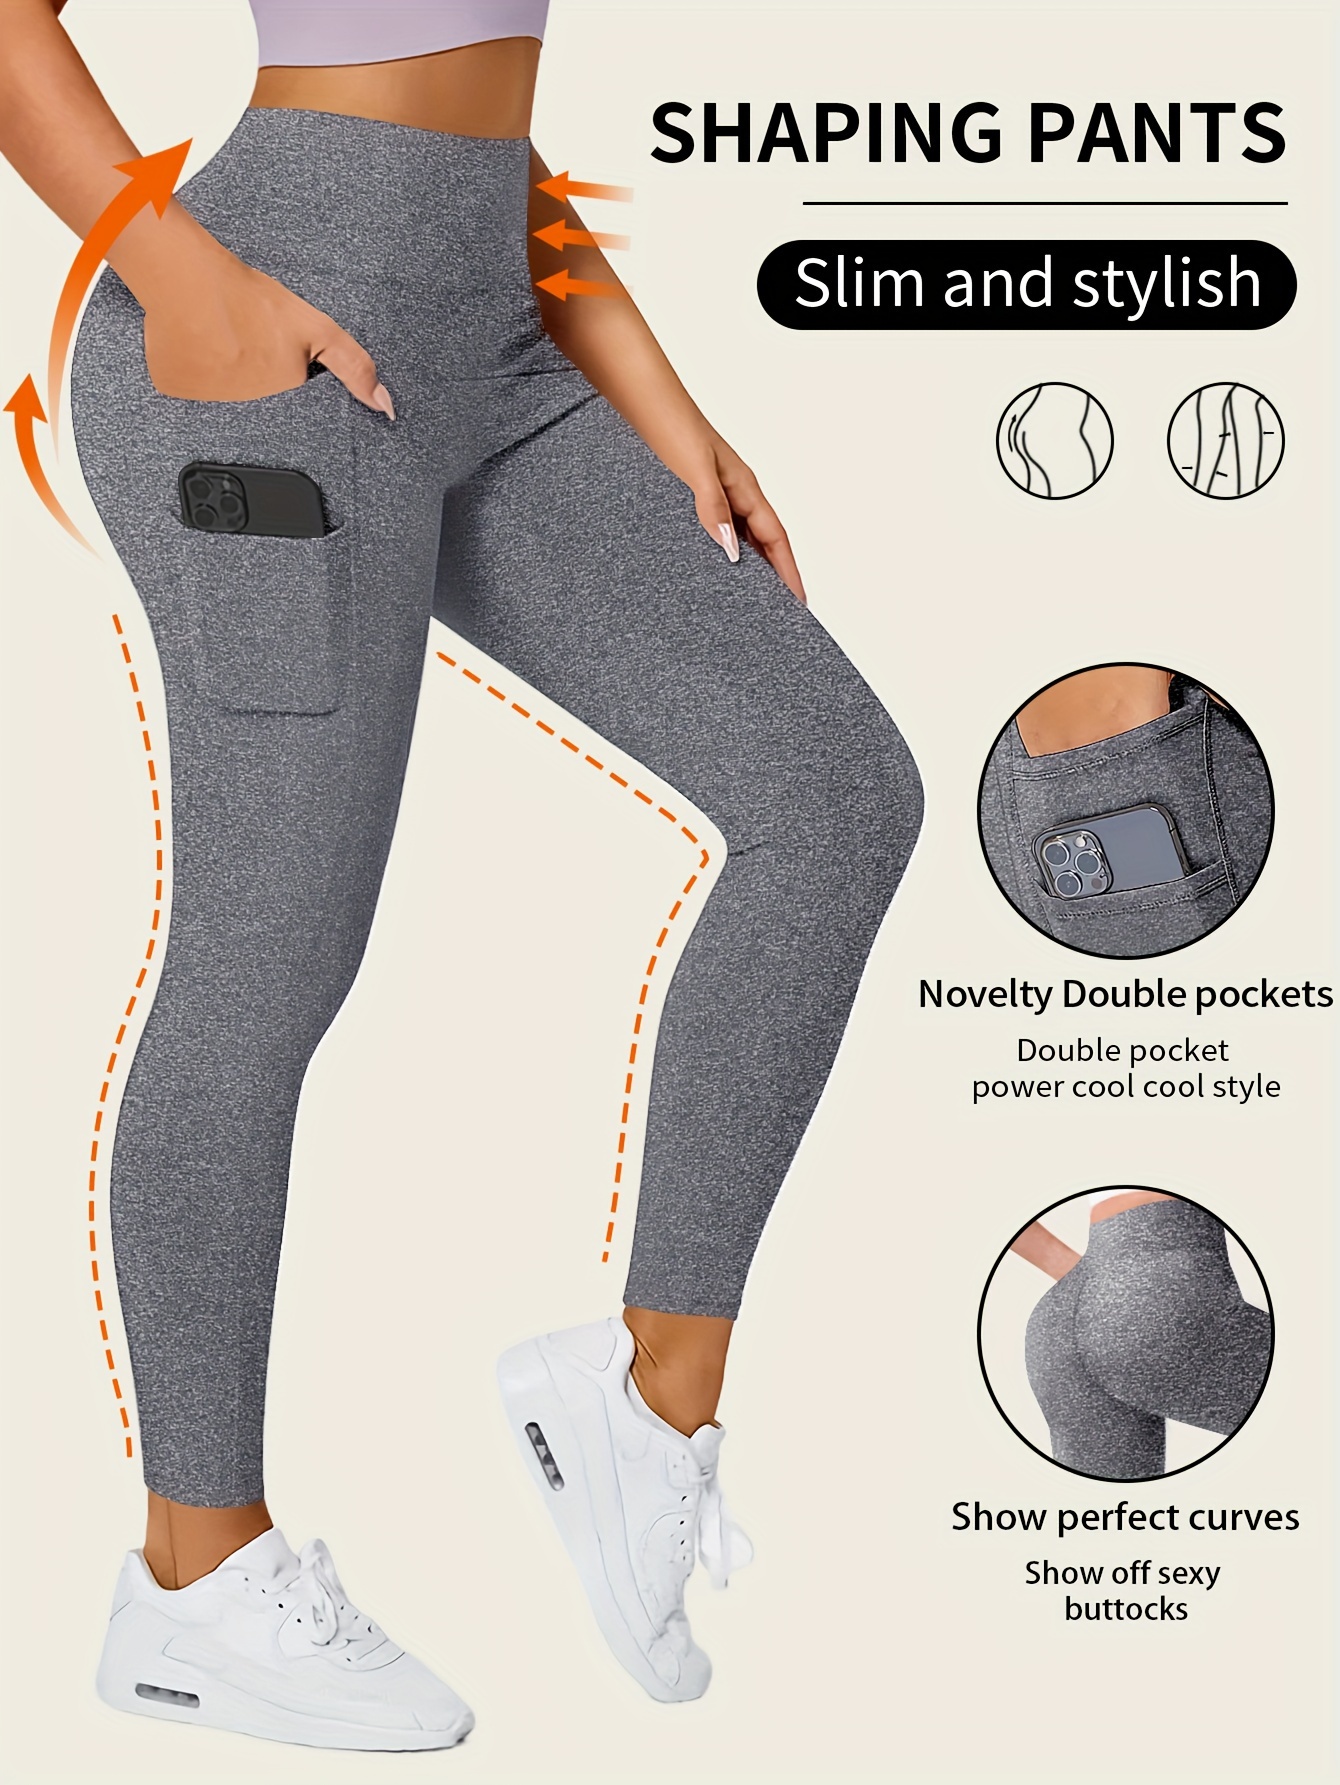 Yoga Pants Fitness Sports Stretch With Pockets Ladies High Waist Leggings  for Women 